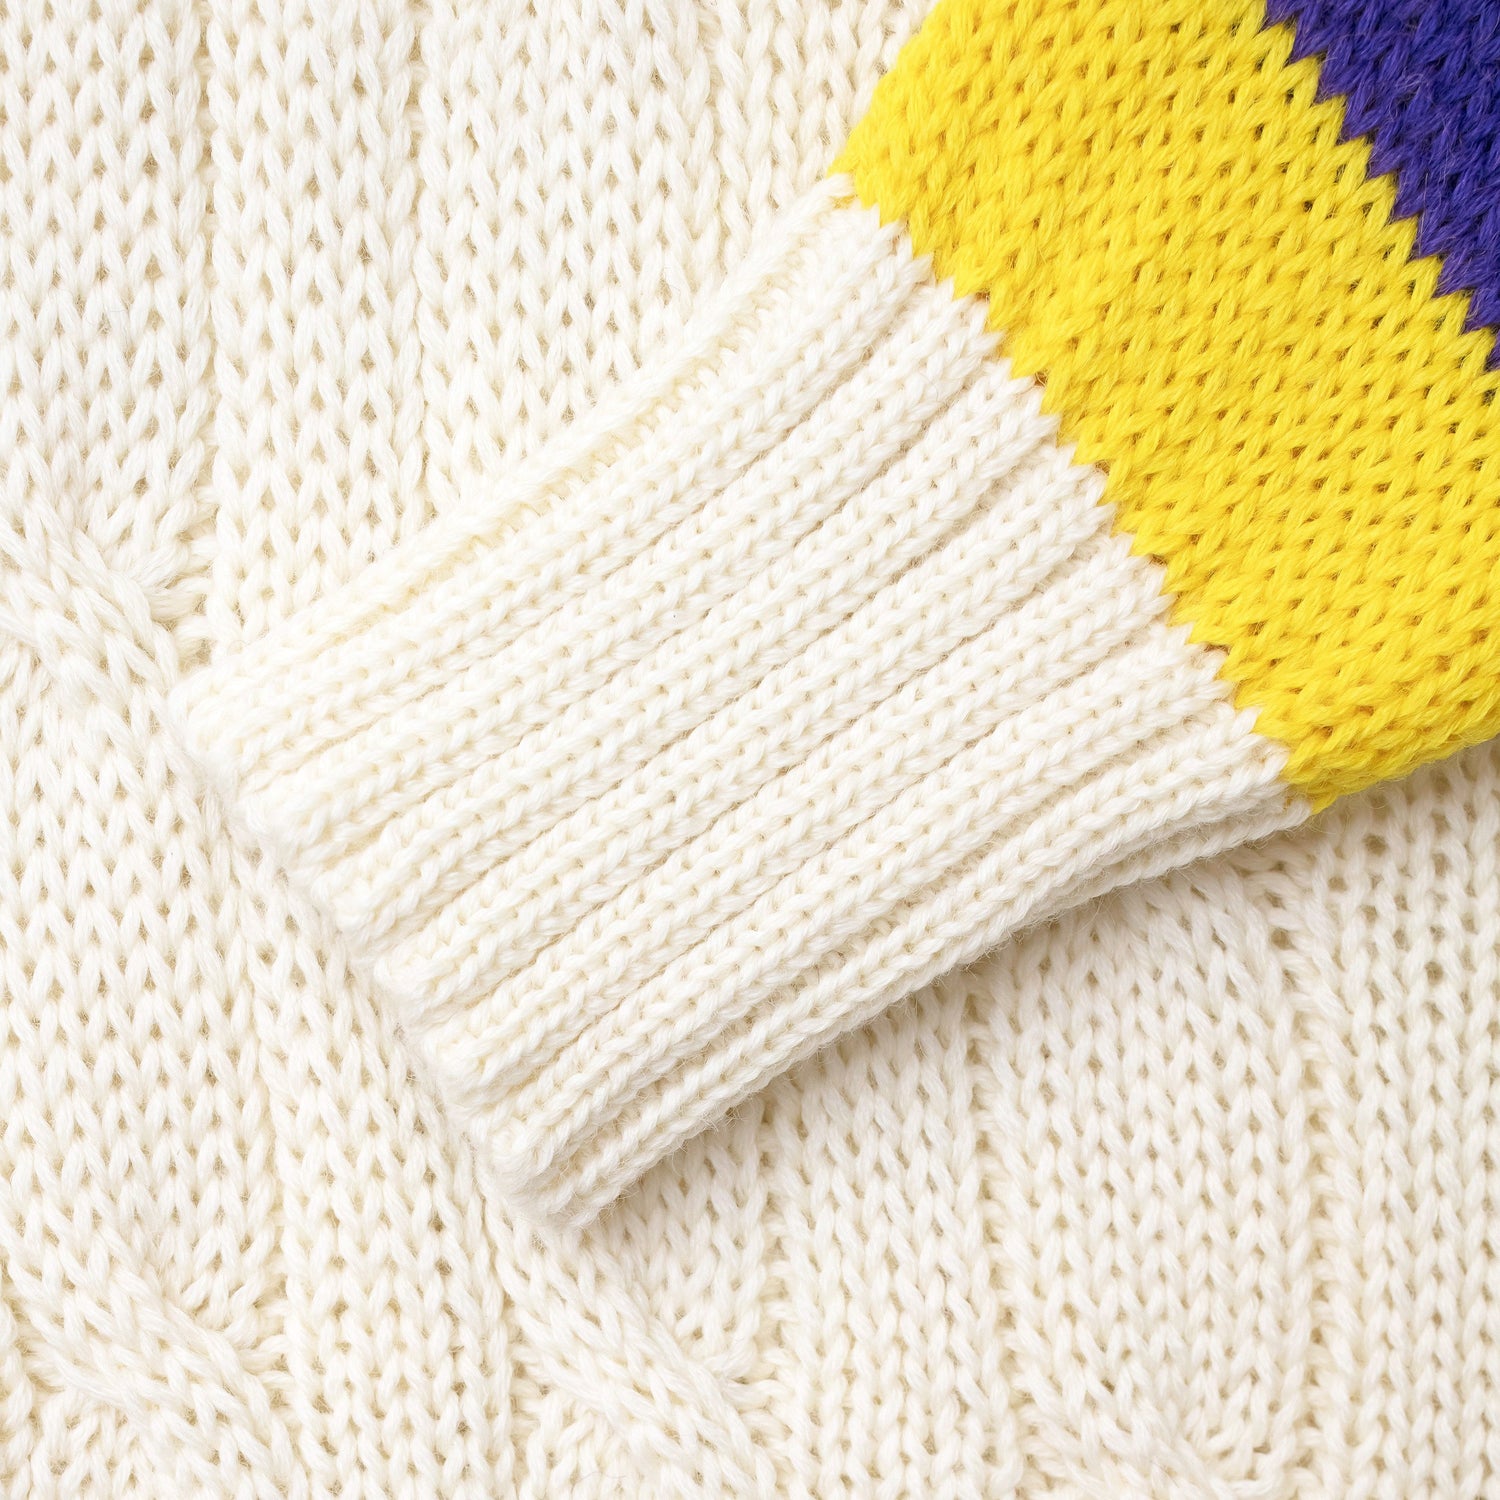 Detail of the cable knit sweater sleeves.